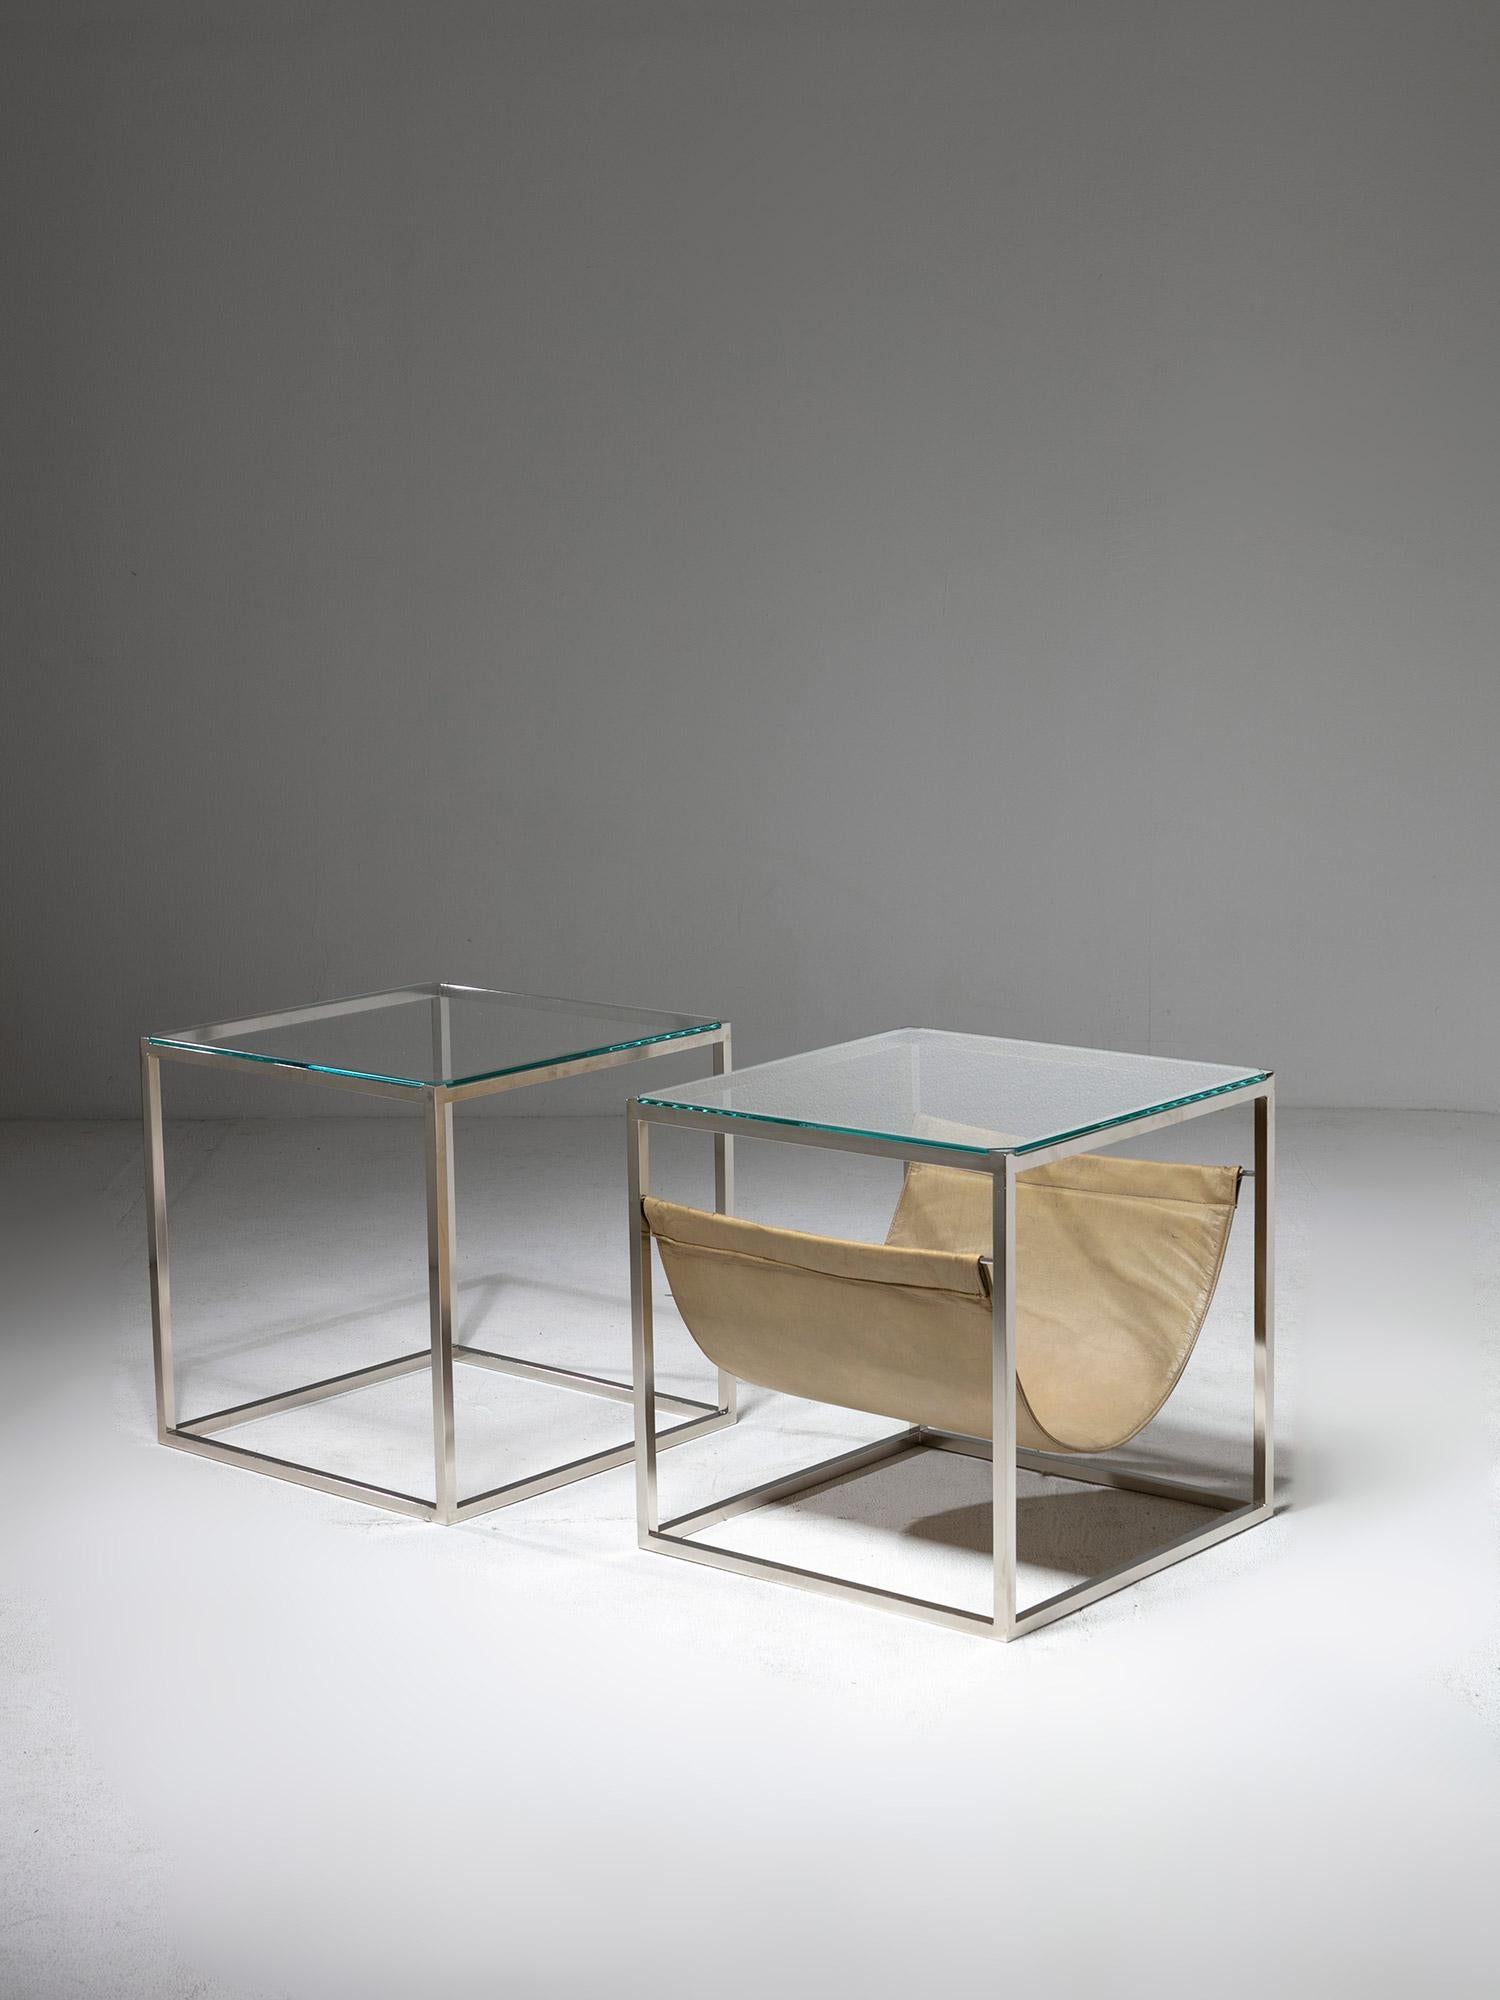 Set of two side tables by Lino Sabattini for Sabattini Argenteria.
Squared metal frame and glass top with cut edges. 
One piece features a capable leather pocket.